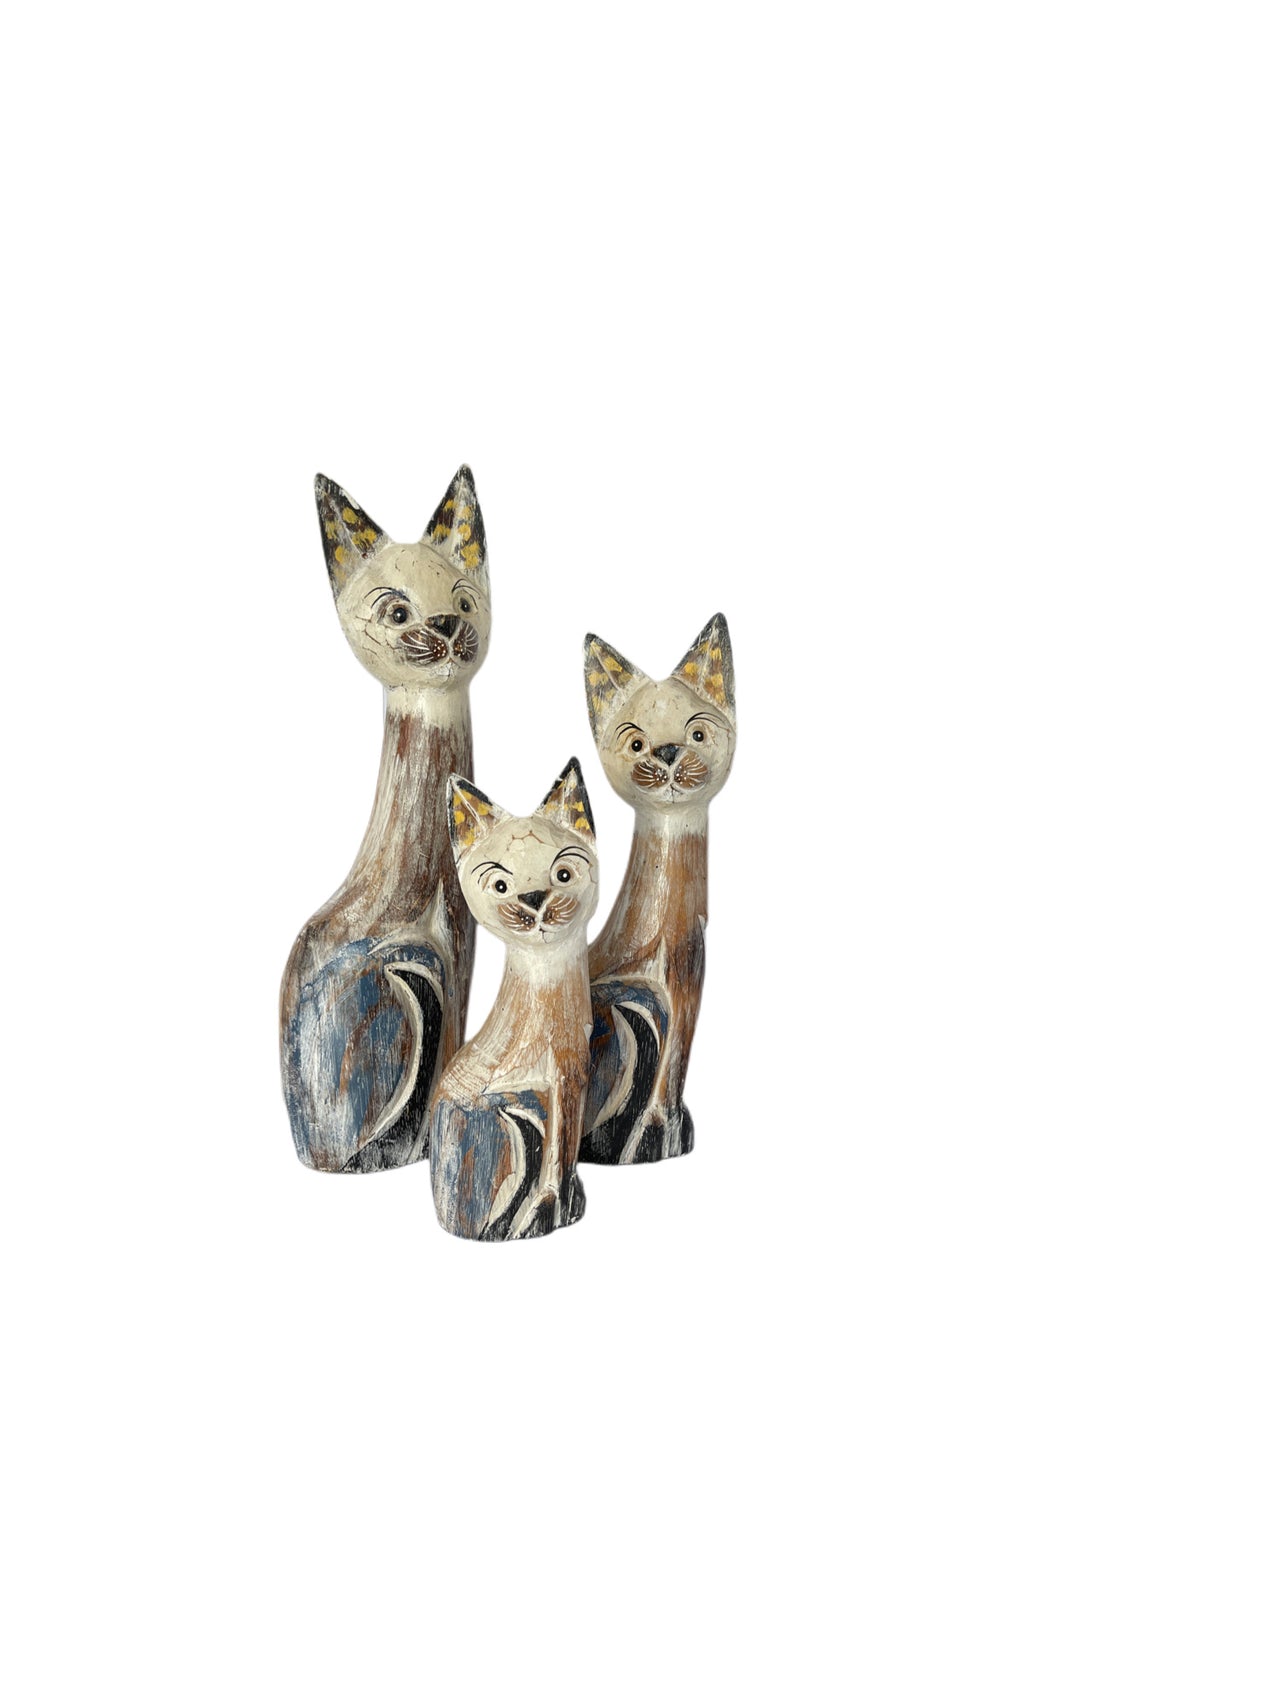 Balinese Wooden Cat Family Set Of 3